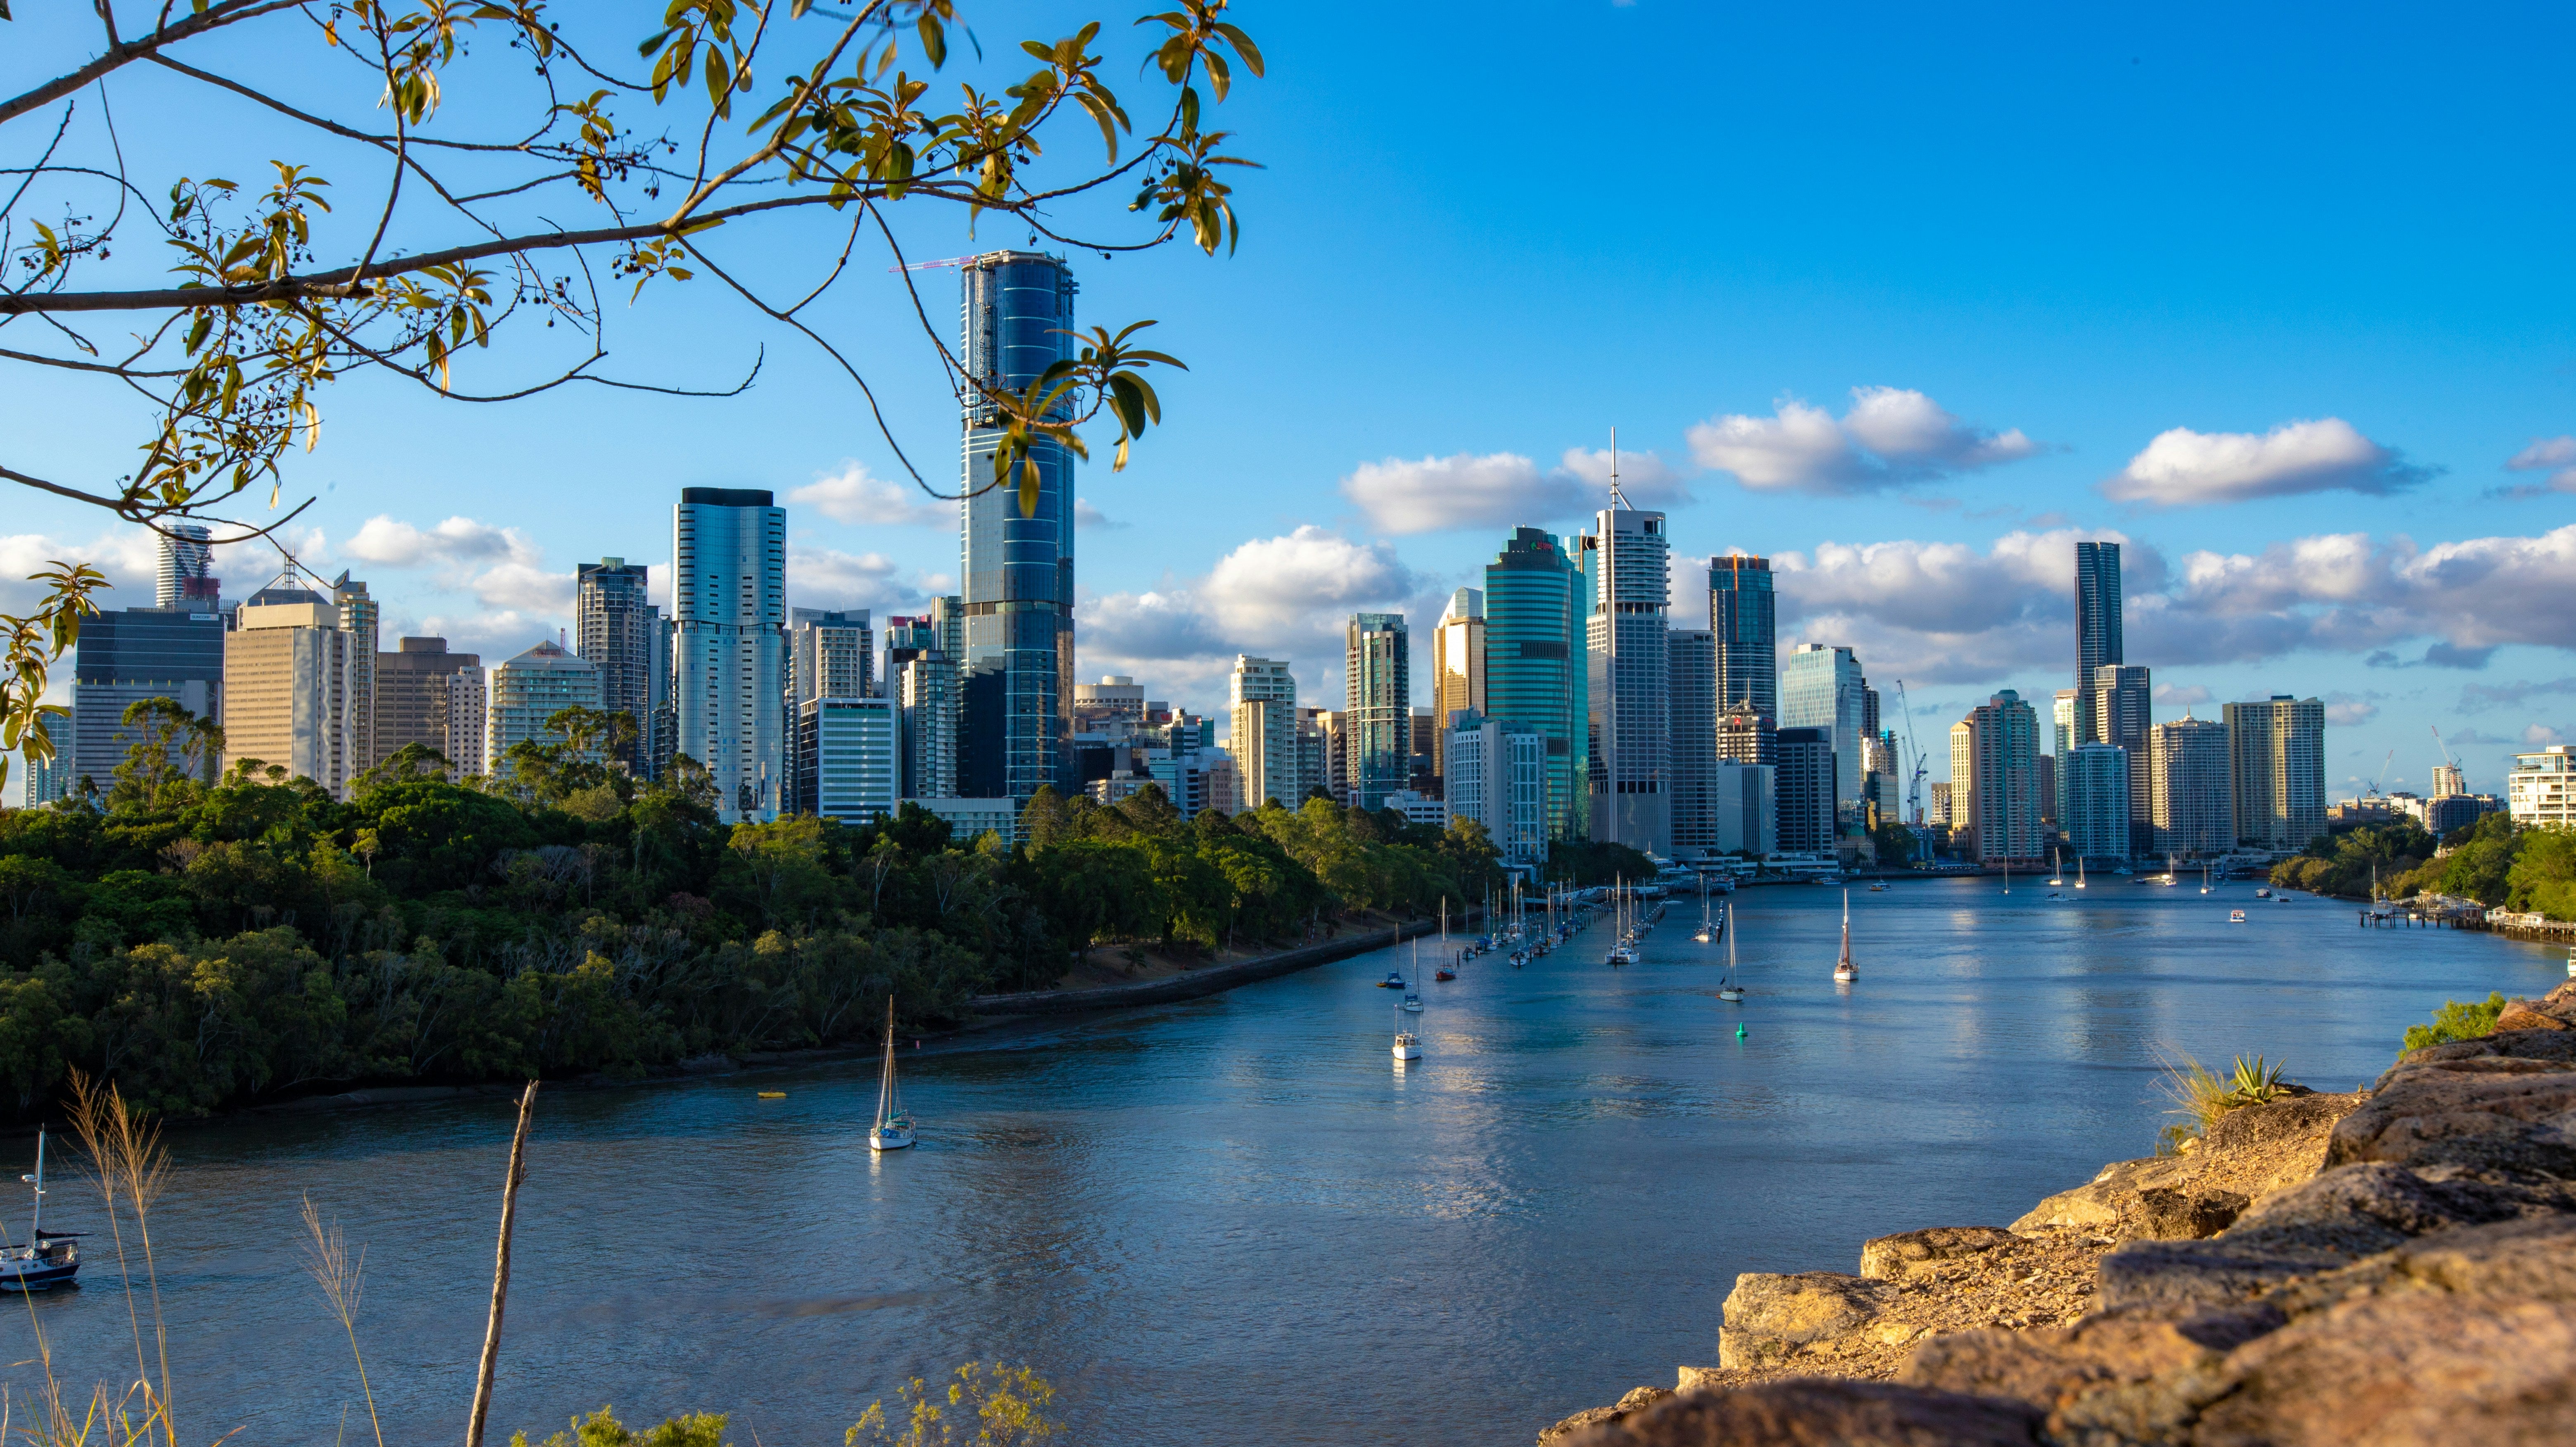 Brisbane will host the Olympic and Paralympic Games in 2032